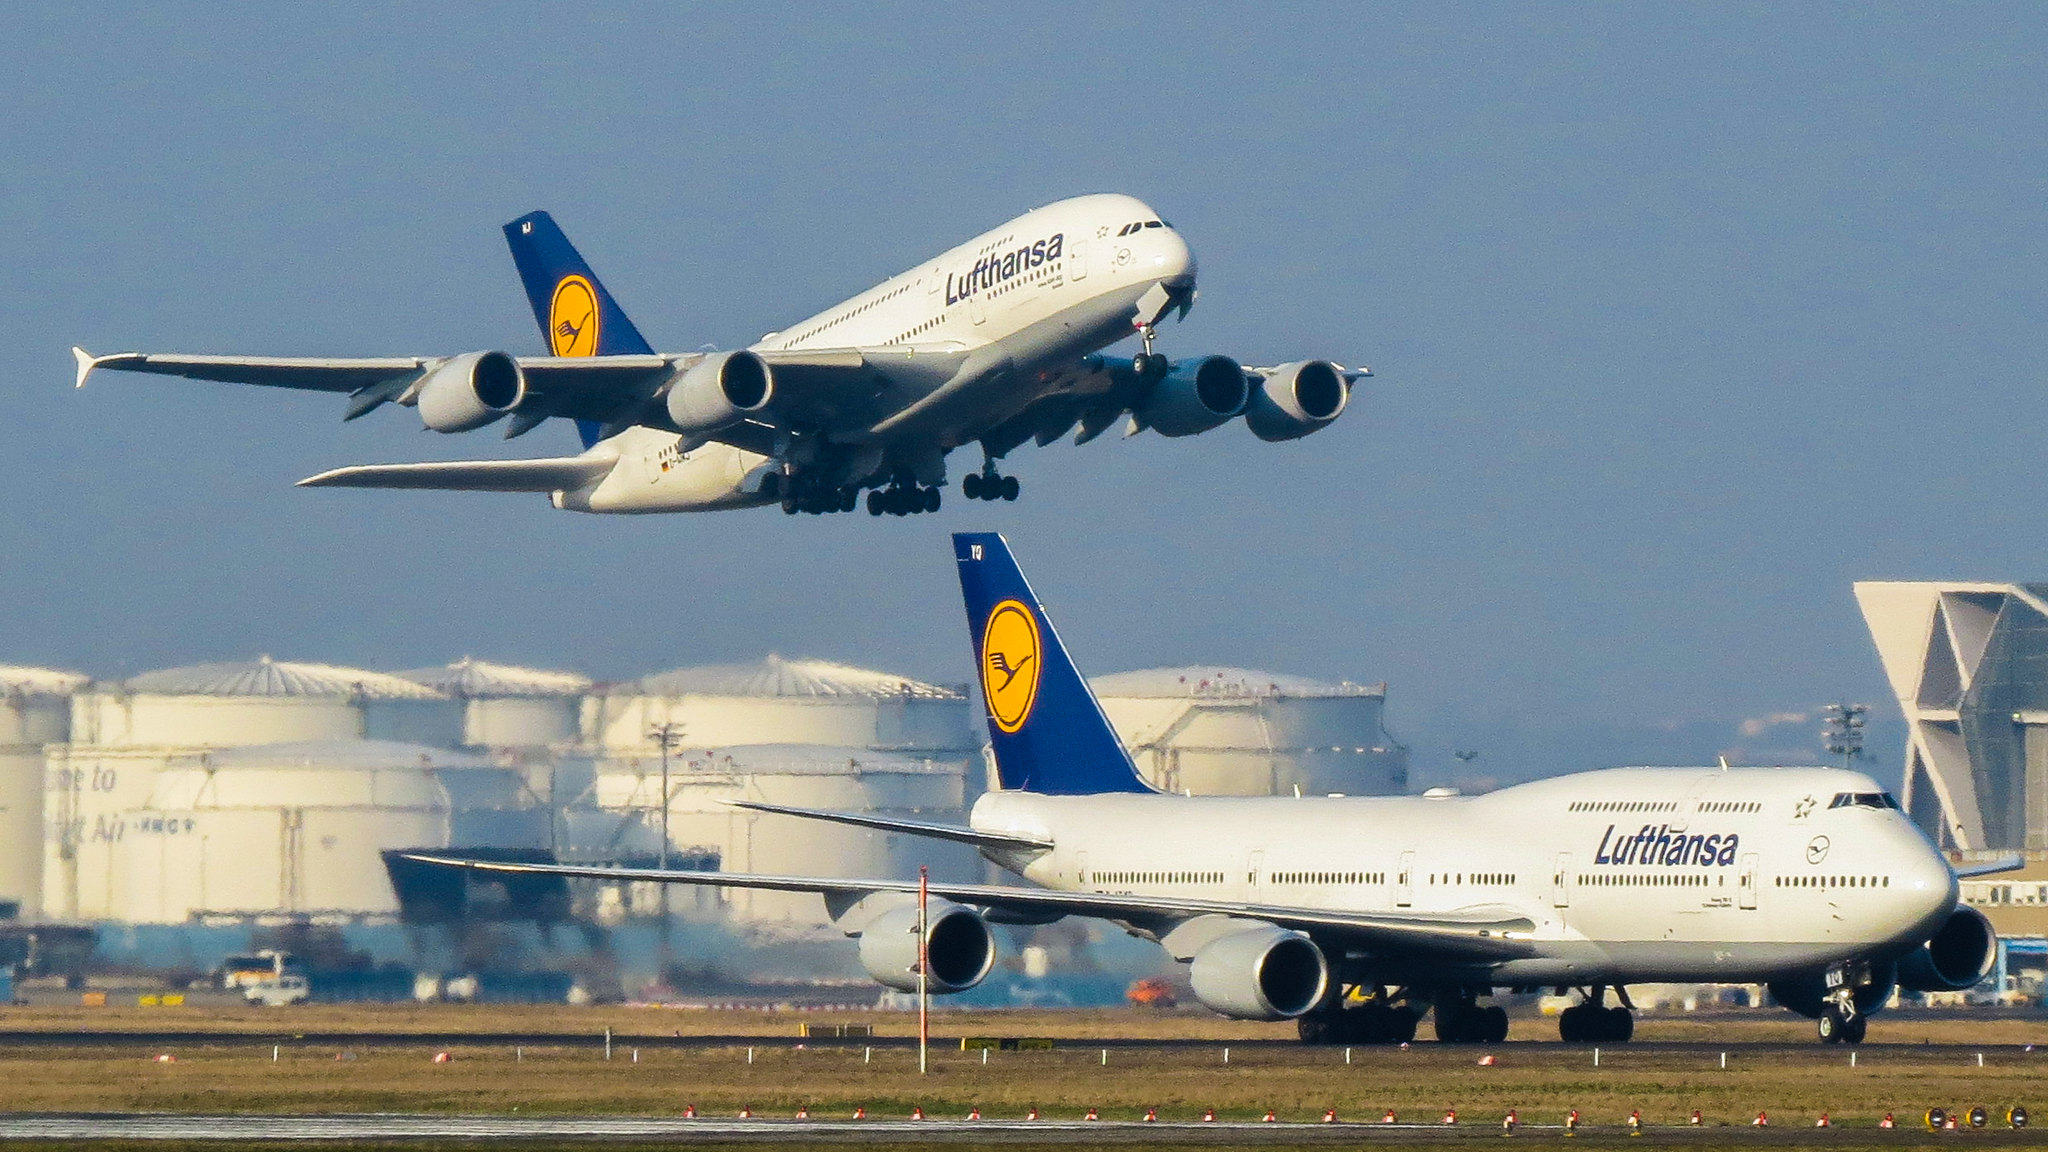 A pair of Lufthansa airliners.